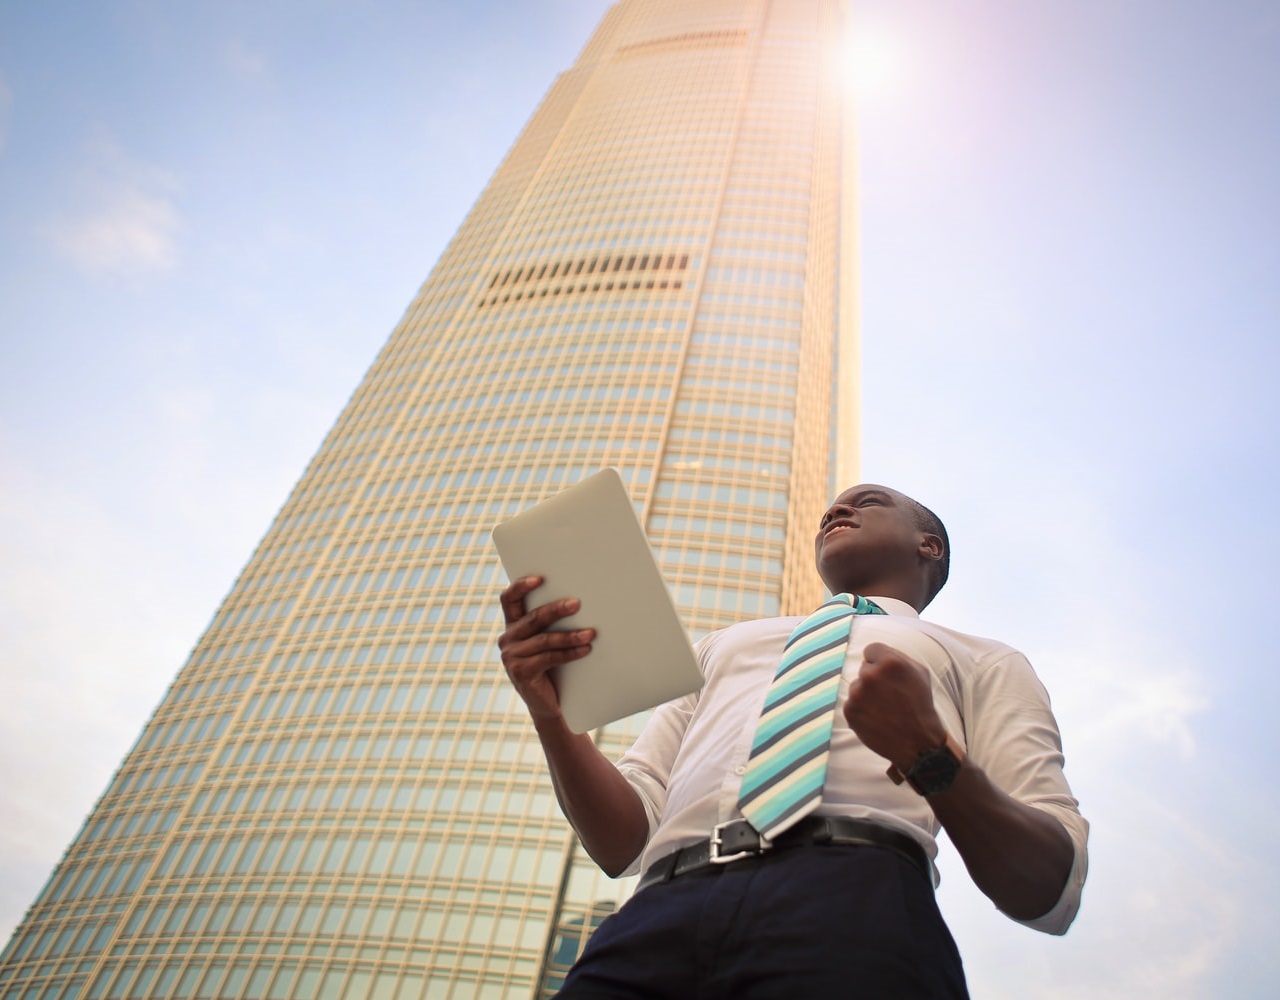 Photo of a tidily dressed young man holding documents, with the background of a tall building and a blue, sunny sky